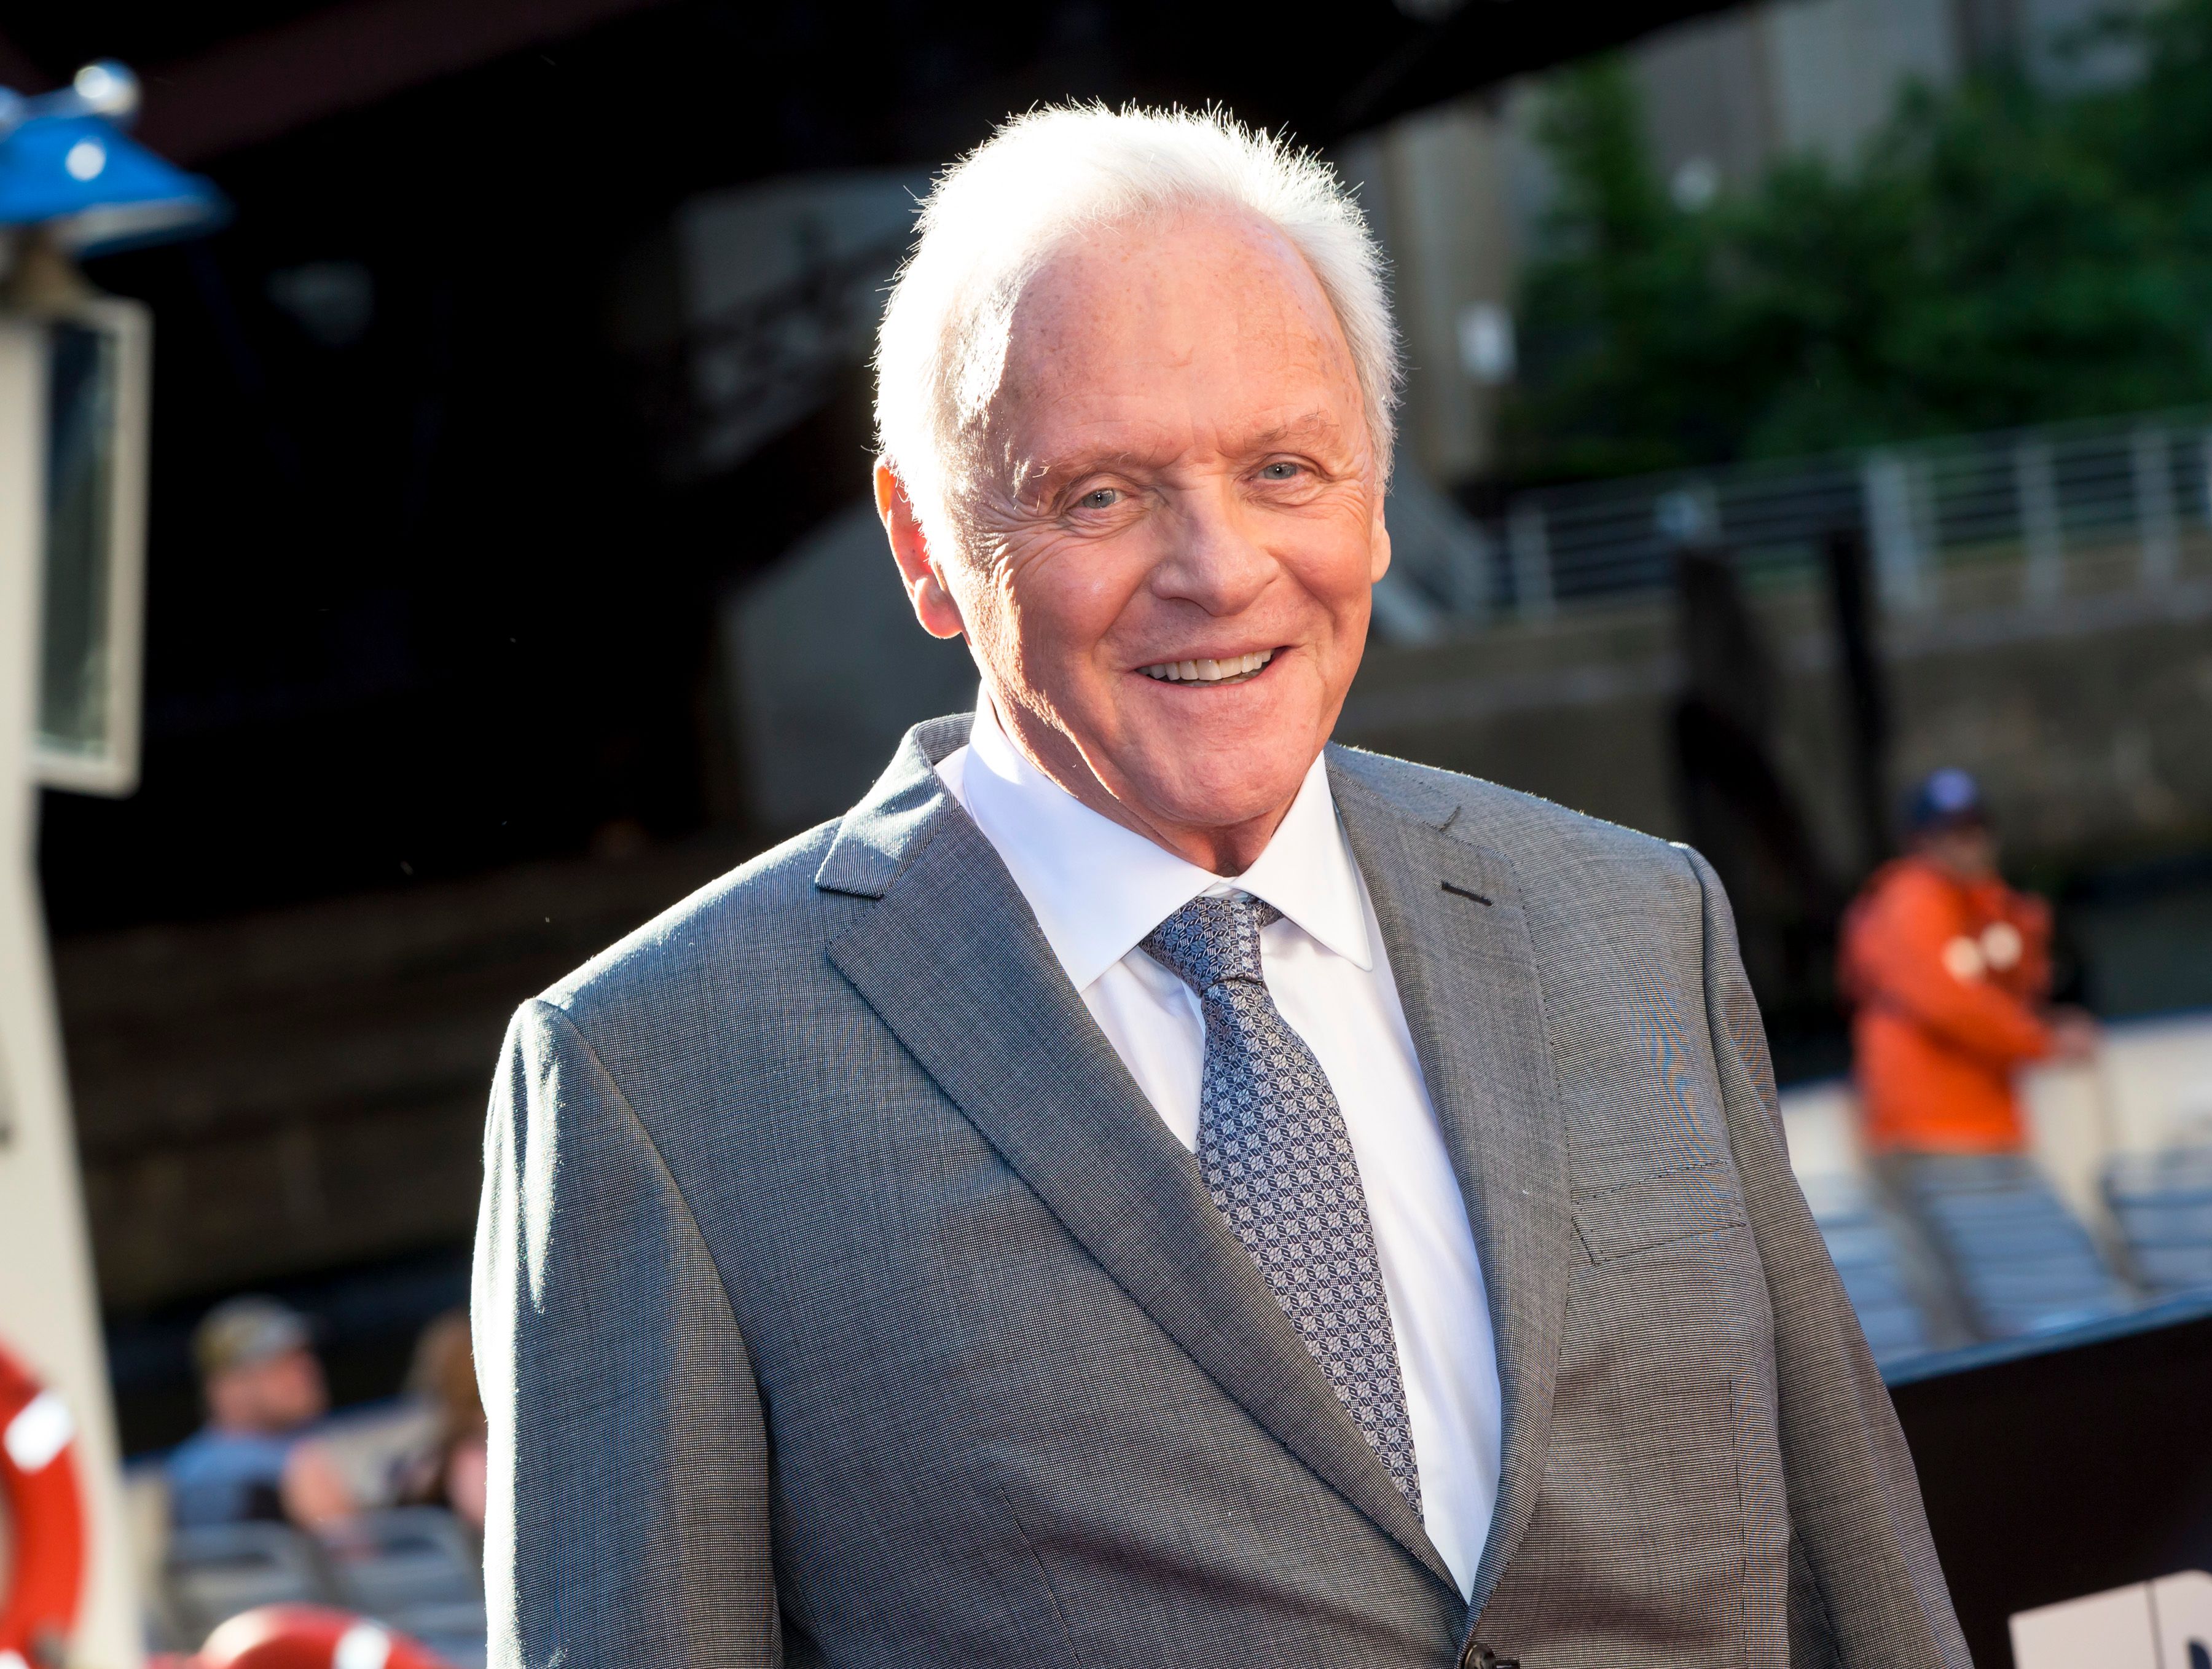 Anthony Hopkins at the Transformers The Last Knight Chicago premiere at Civic Opera Building on June 20, 2017 in Chicago, Illinois | Photo: Getty Images